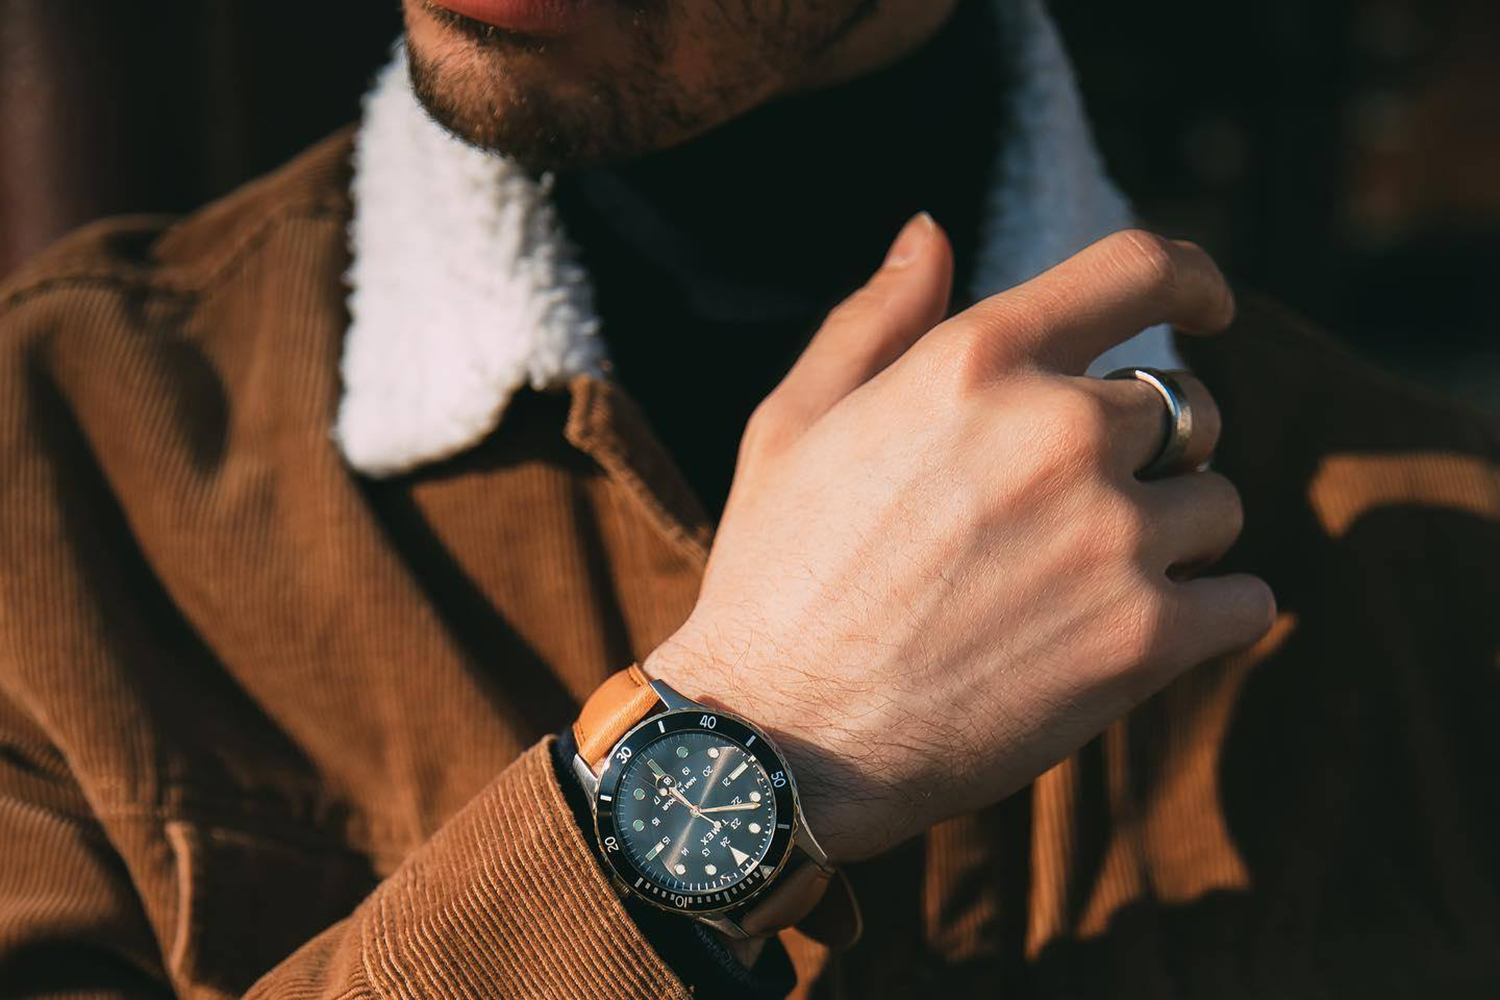 Affordable Watch Hunting: Best Timex Watches For Men - The Manual